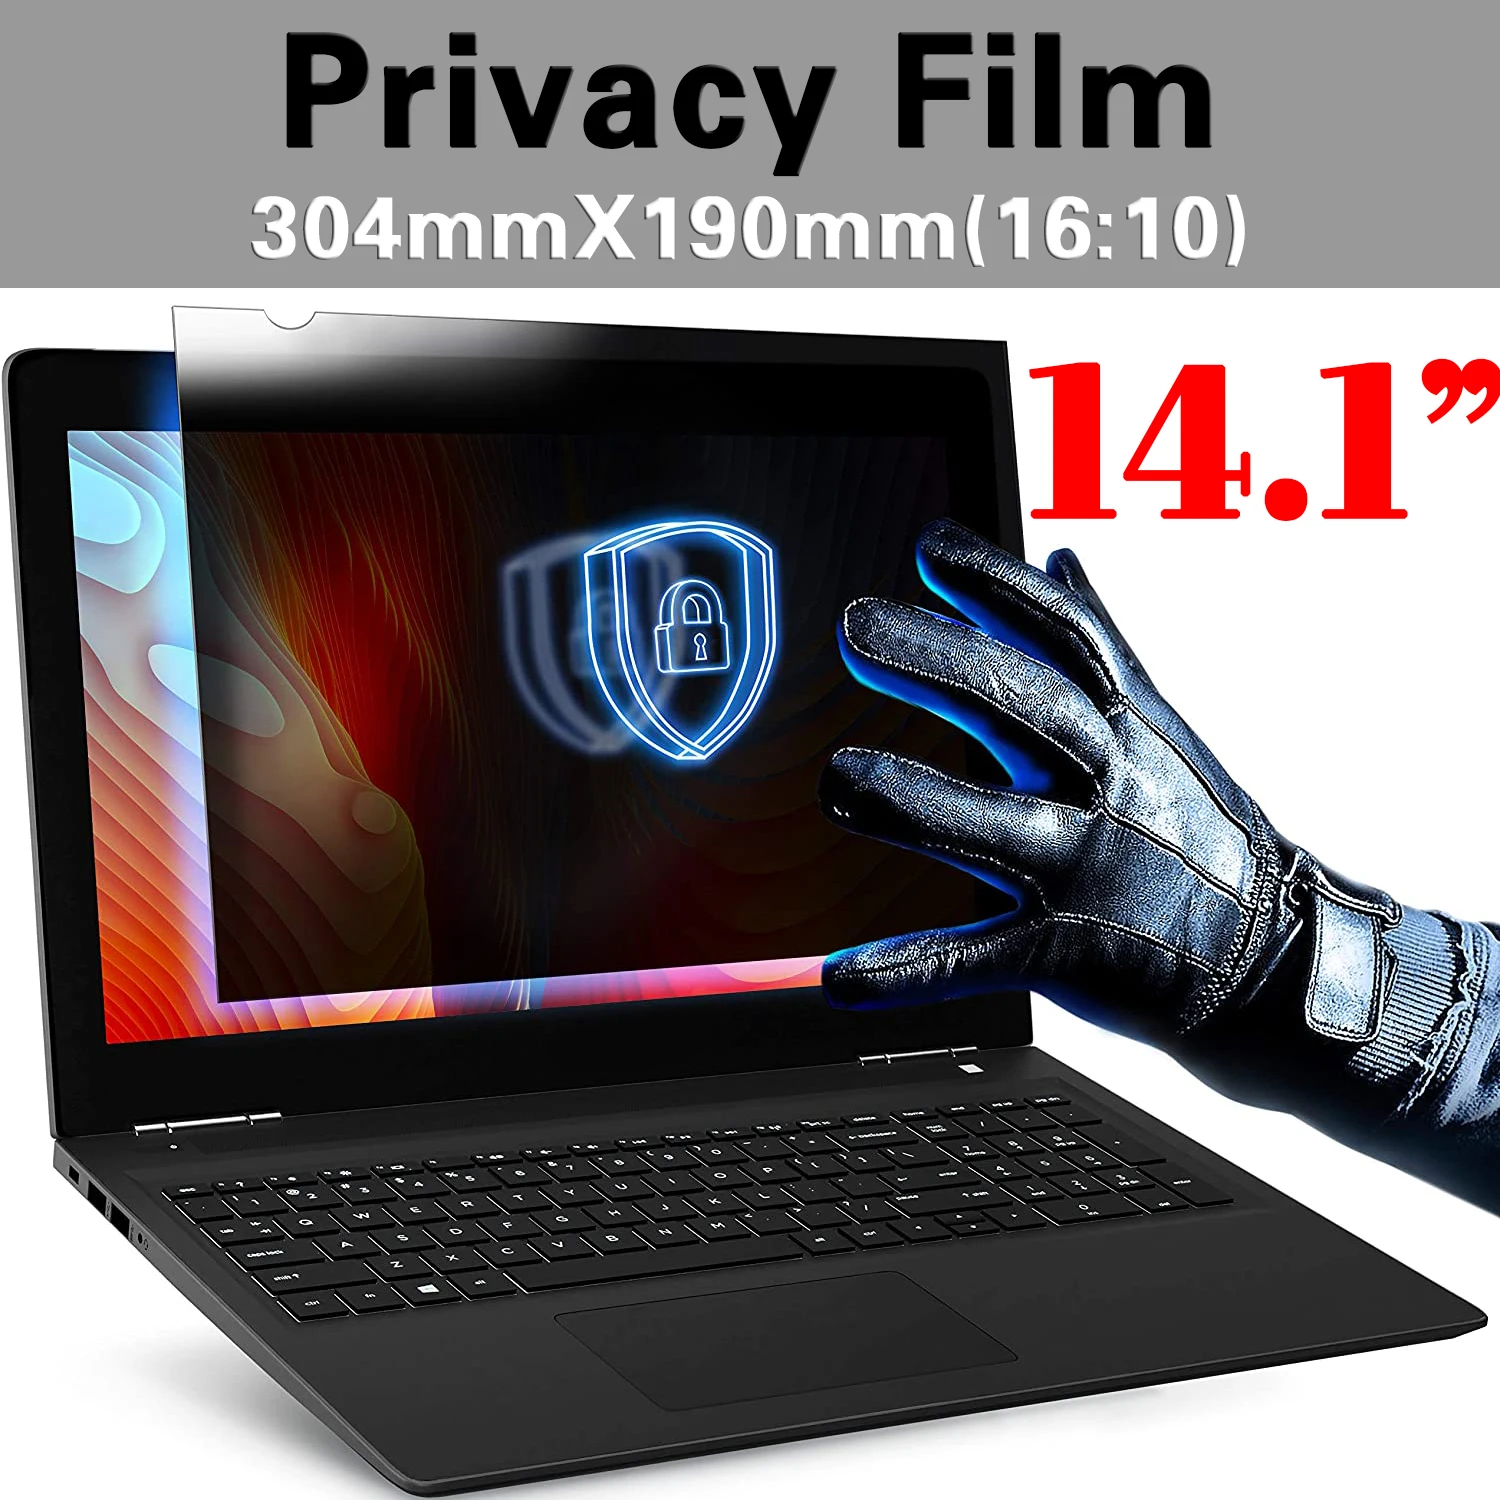 14.1 inch (304mm*190mm) Privacy Filter Anti spy Screens protective film for 16:10 Laptop